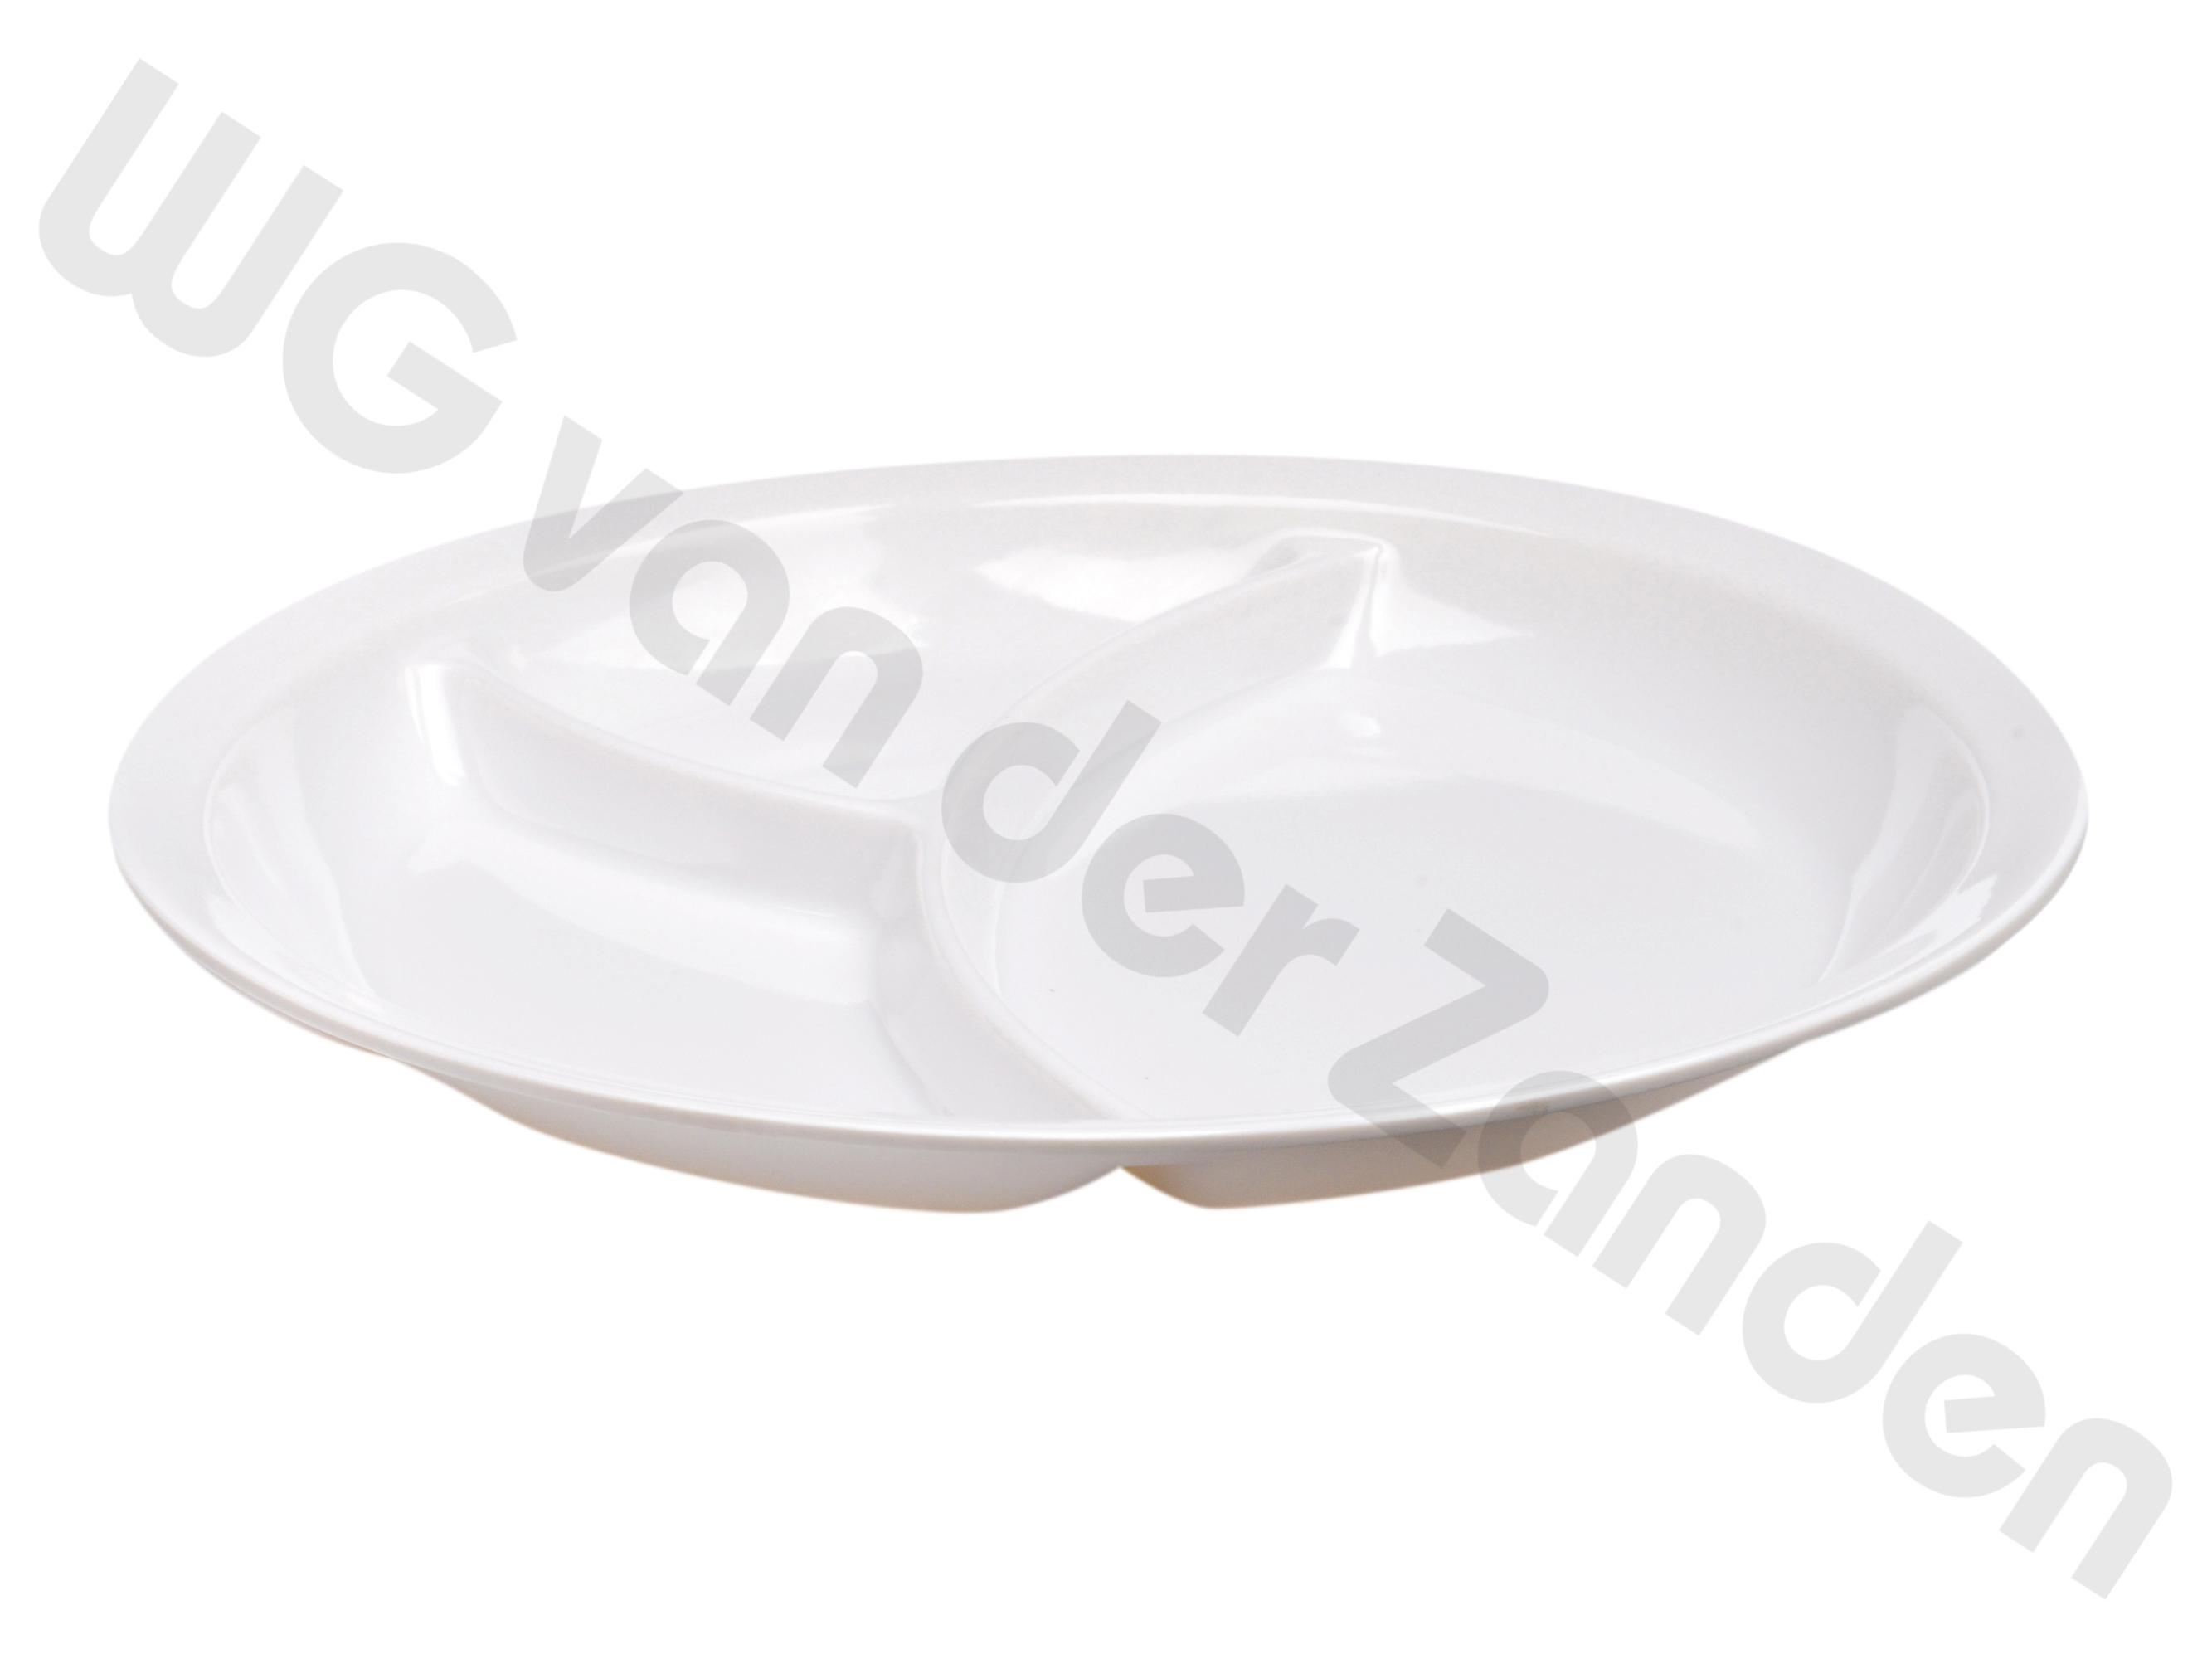 441109 PLATE MELAMINE 25.5CMØ 3-COMPARTED